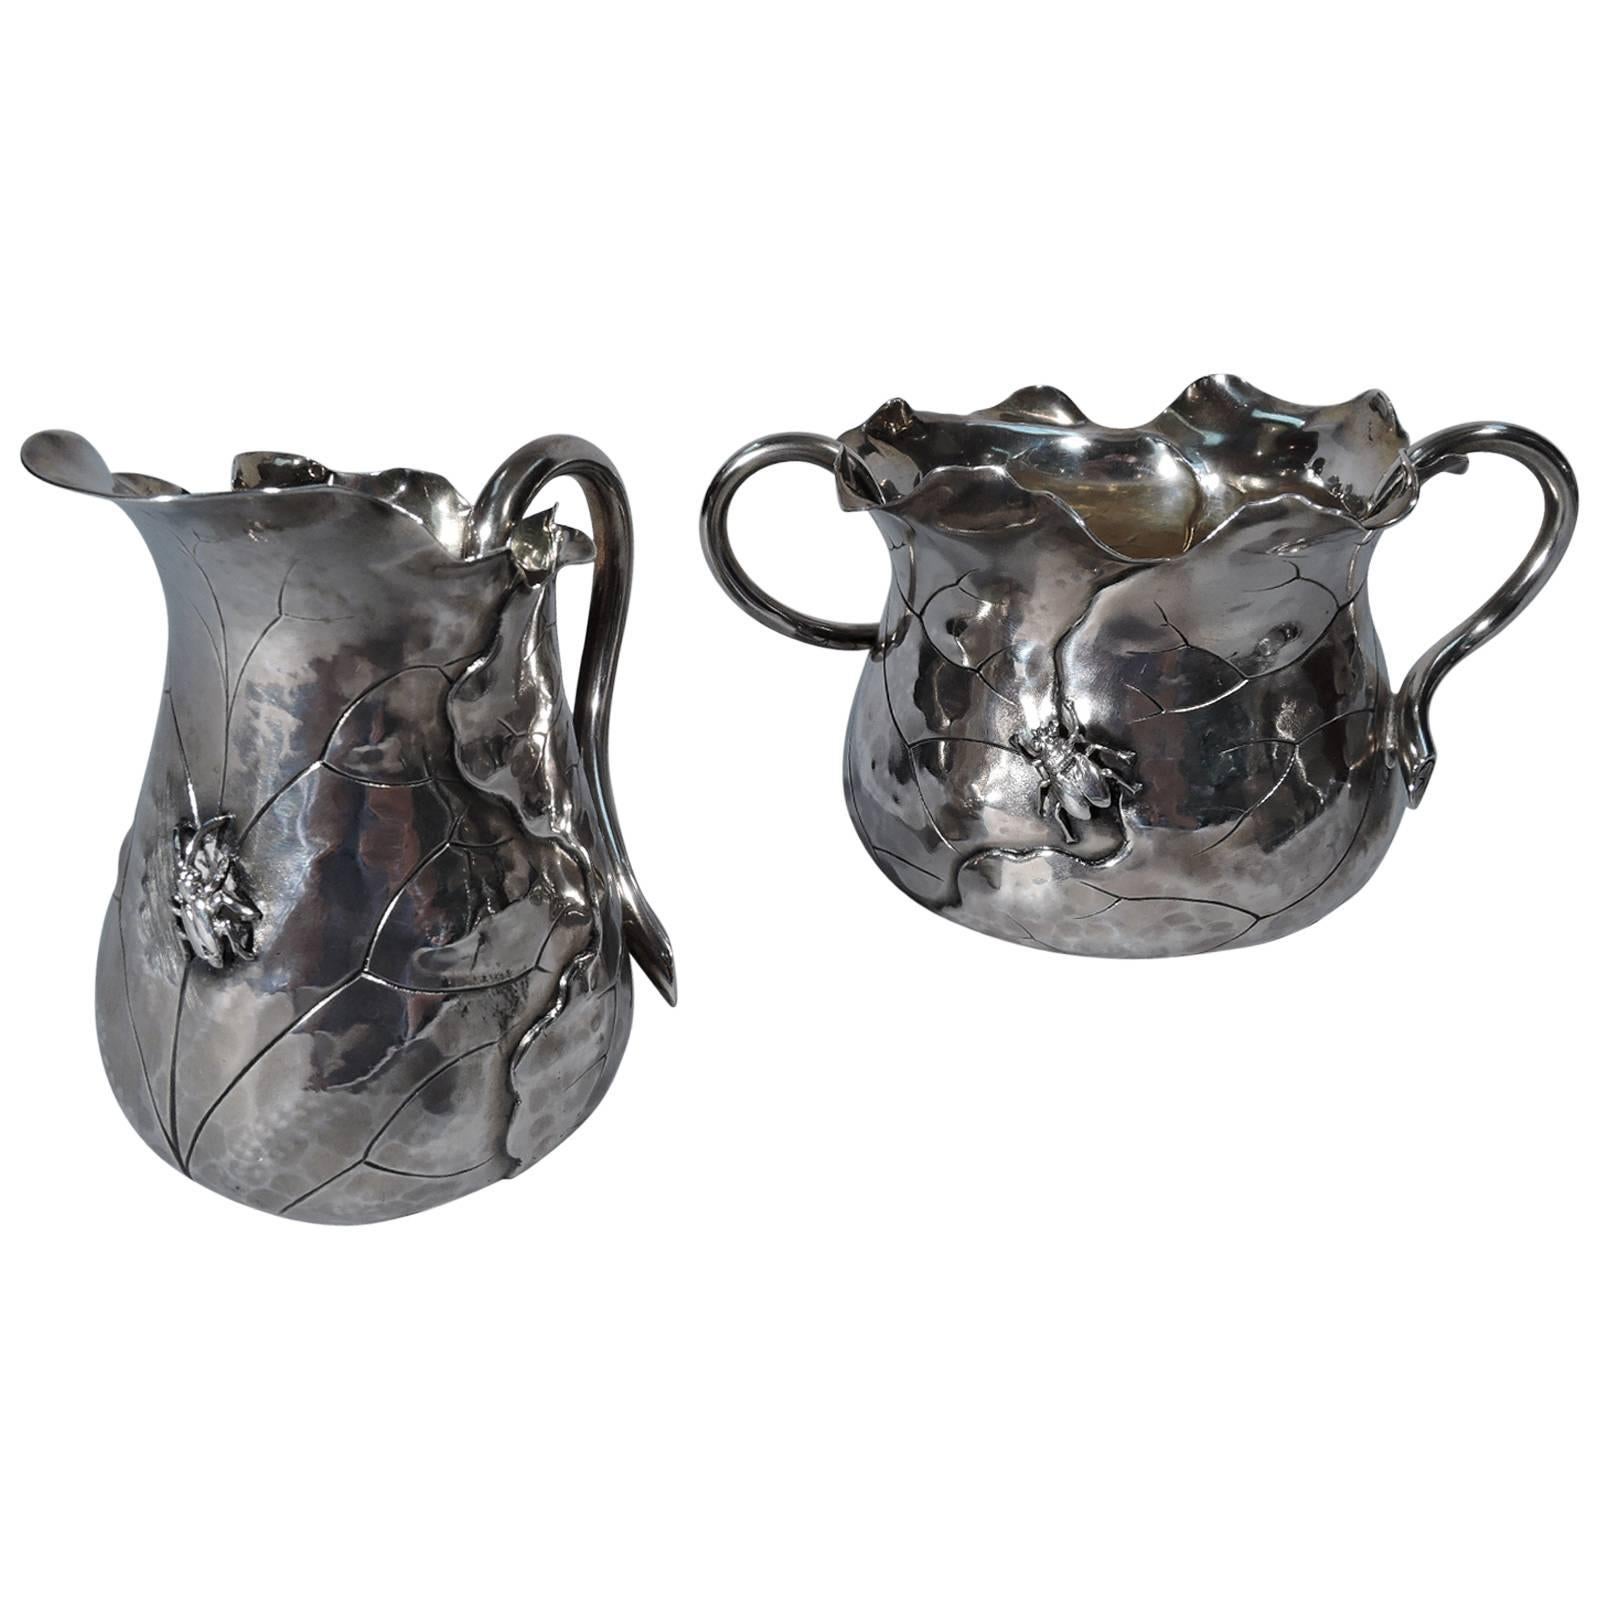 Shiebler Japonesque Sterling Silver Creamer and Sugar with Applied Bugs